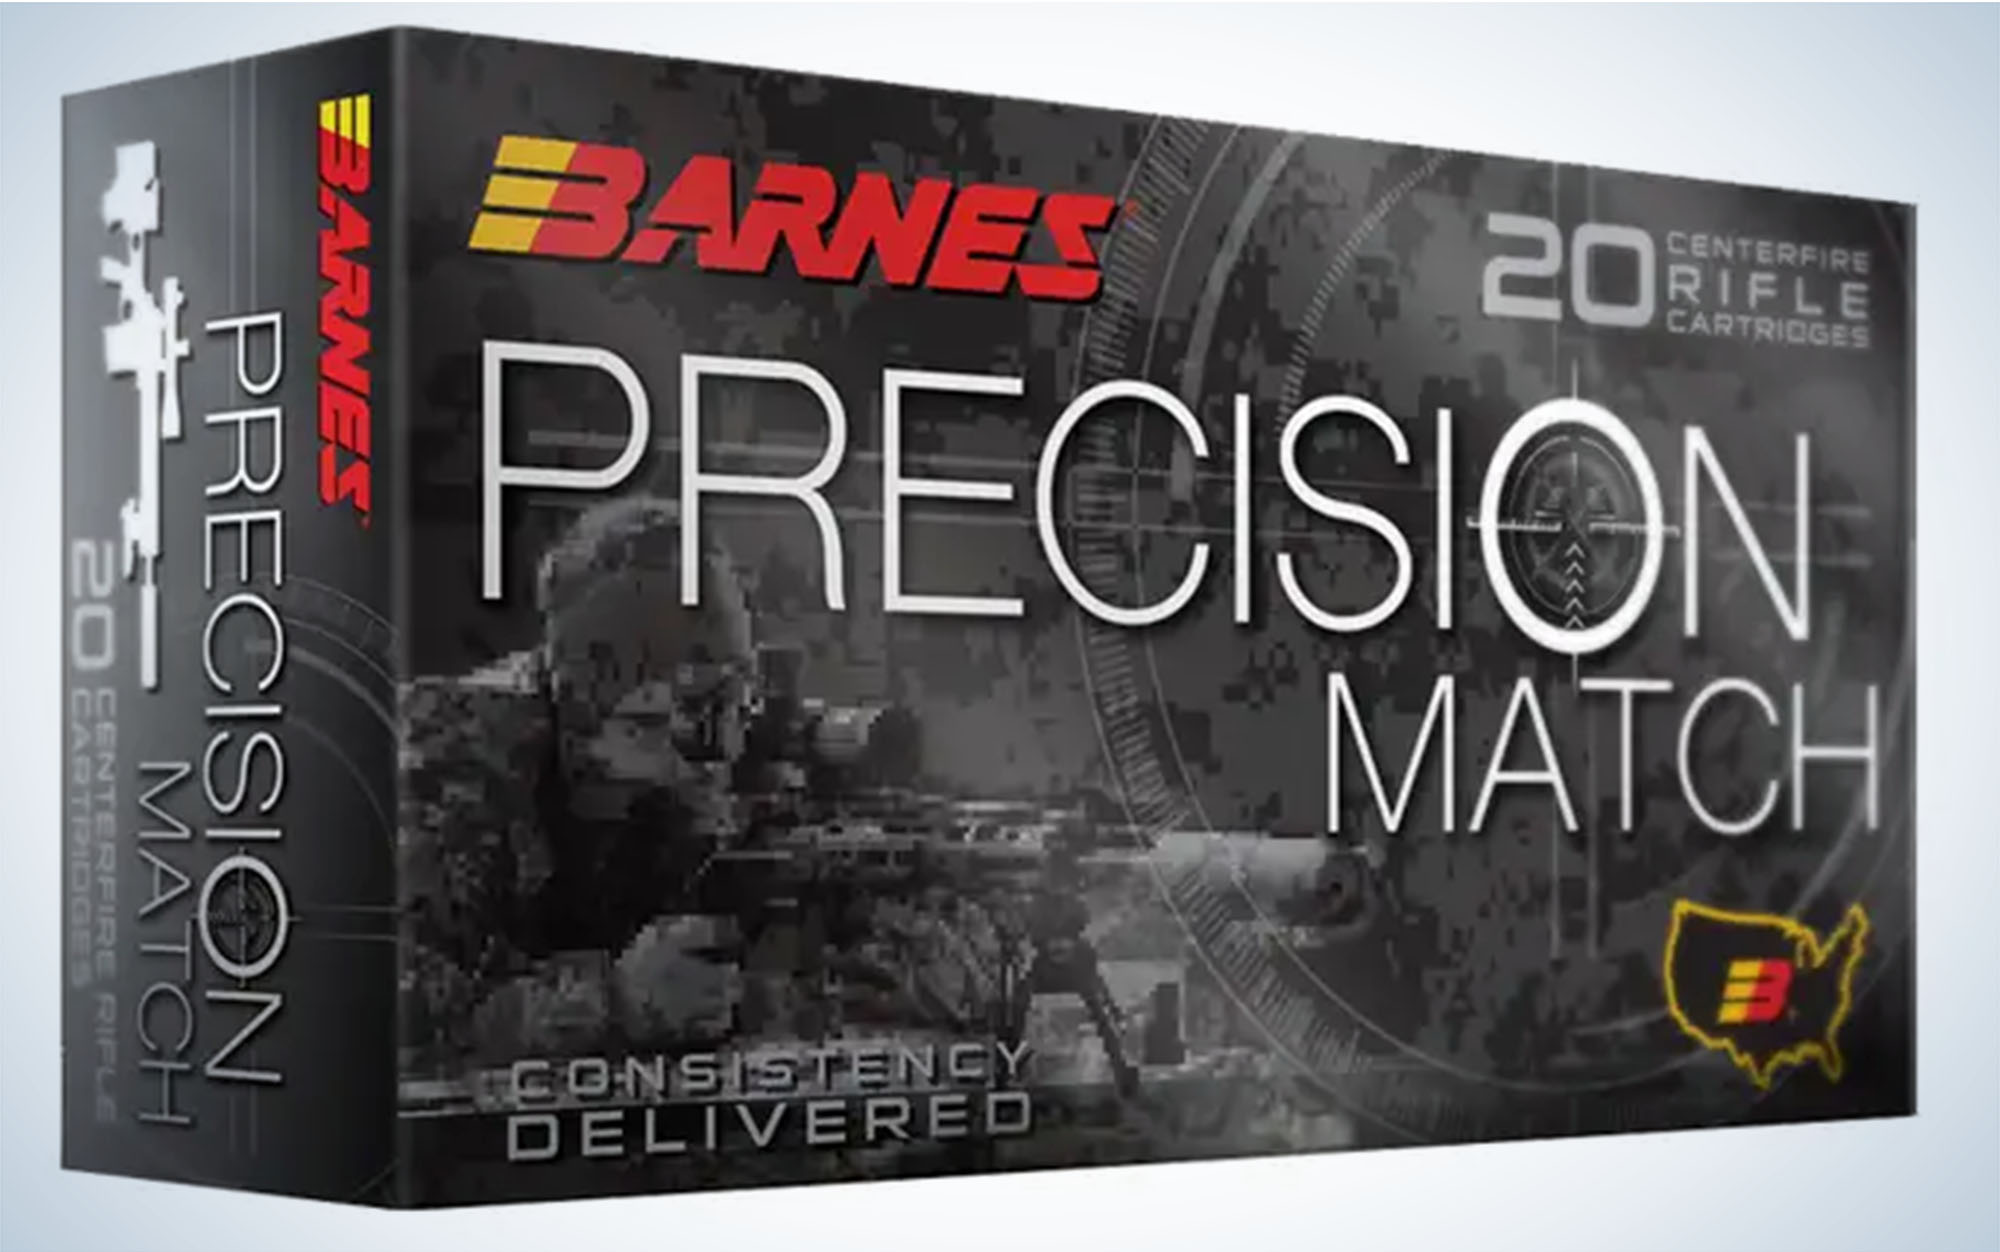 Barnes 220-grain Precision Match is best for target shooting.